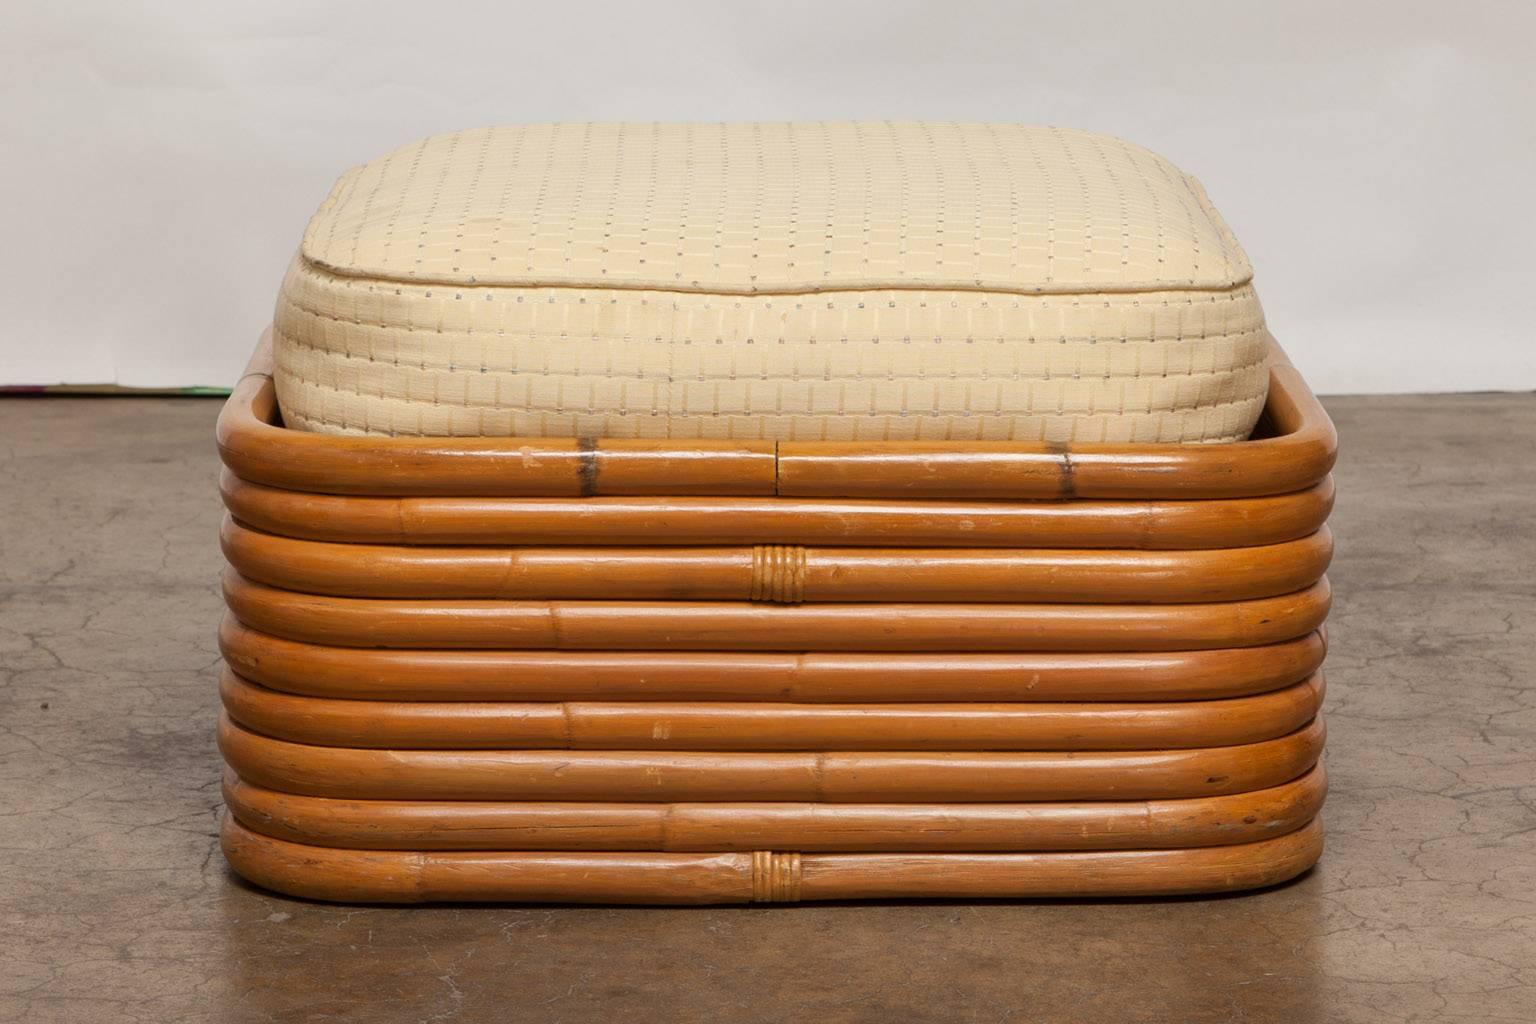 Midcentury six-strand stacked rattan ottoman by Kosuga for Paul Frankl. Made of steam bent rattan in Tokyo, Japan from the original manufacturer. Produced in the Art Deco period and purchased from the original owner. Please inquire about additional